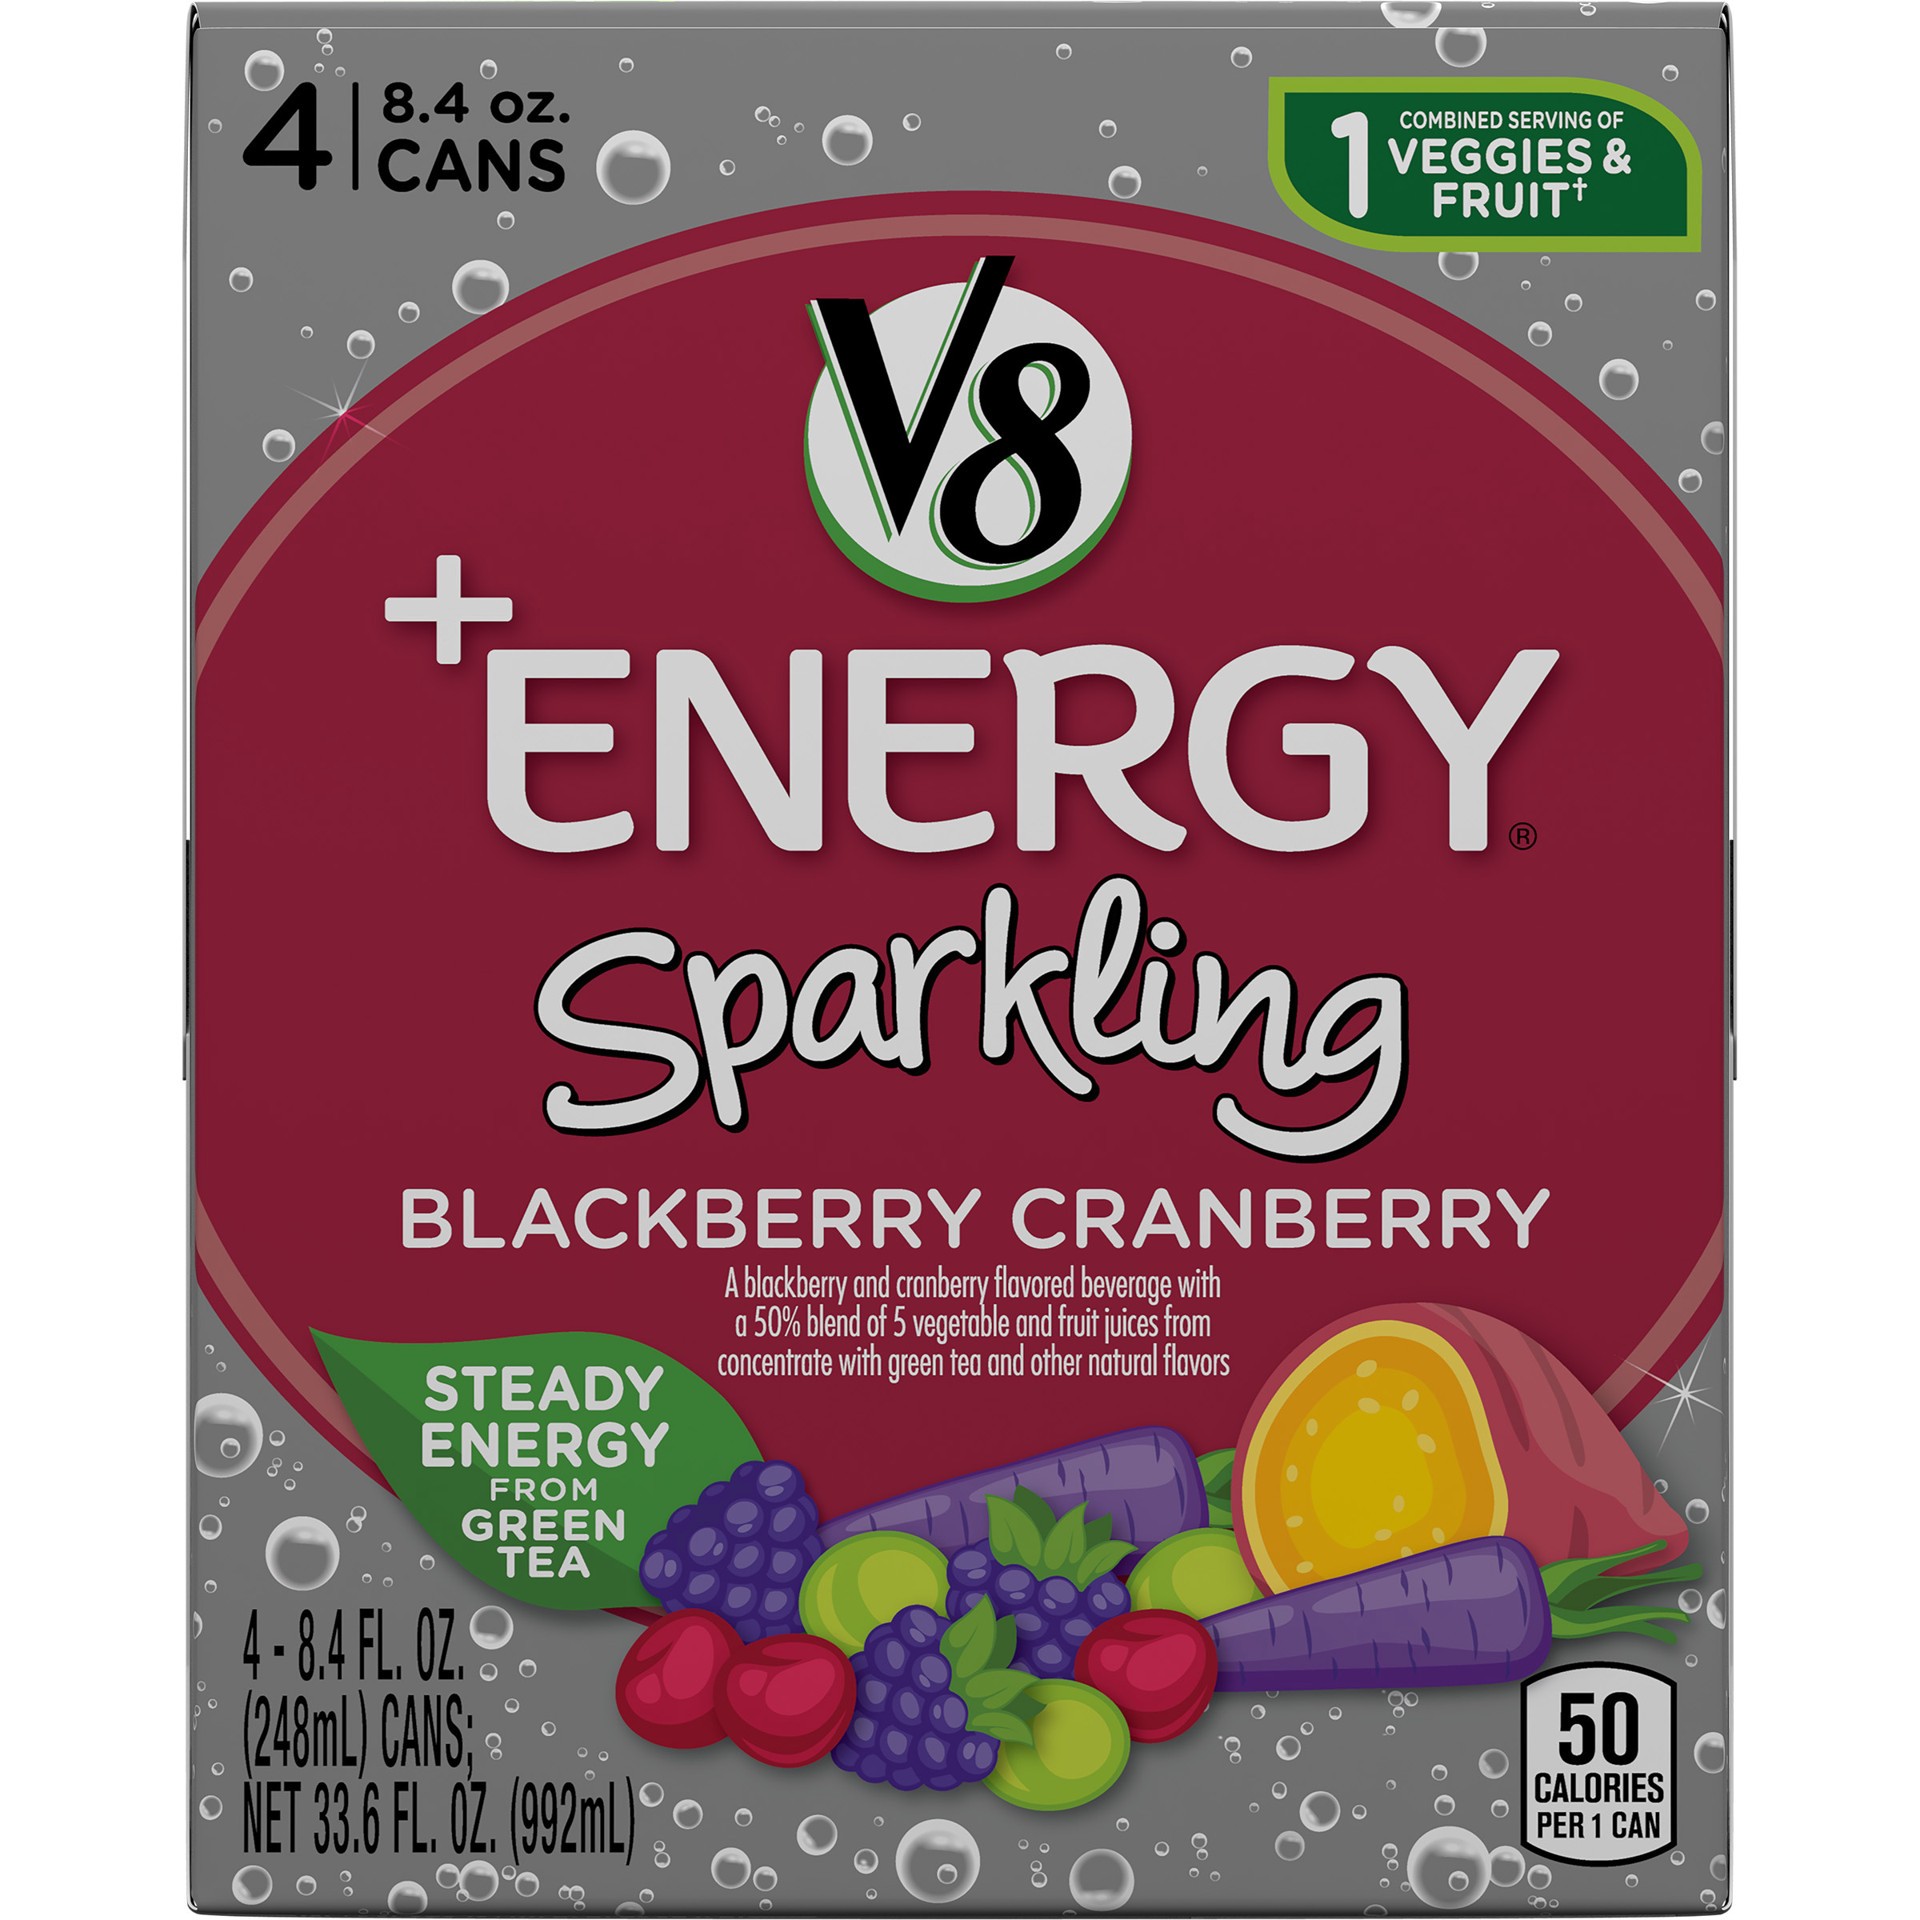 slide 2 of 5, V8 +Energy Sparkling Healthy Energy Drink, Natural Energy from Tea, Blackberry Cranberry, 8.4 Ounce Can (4 Count), 33.6 oz